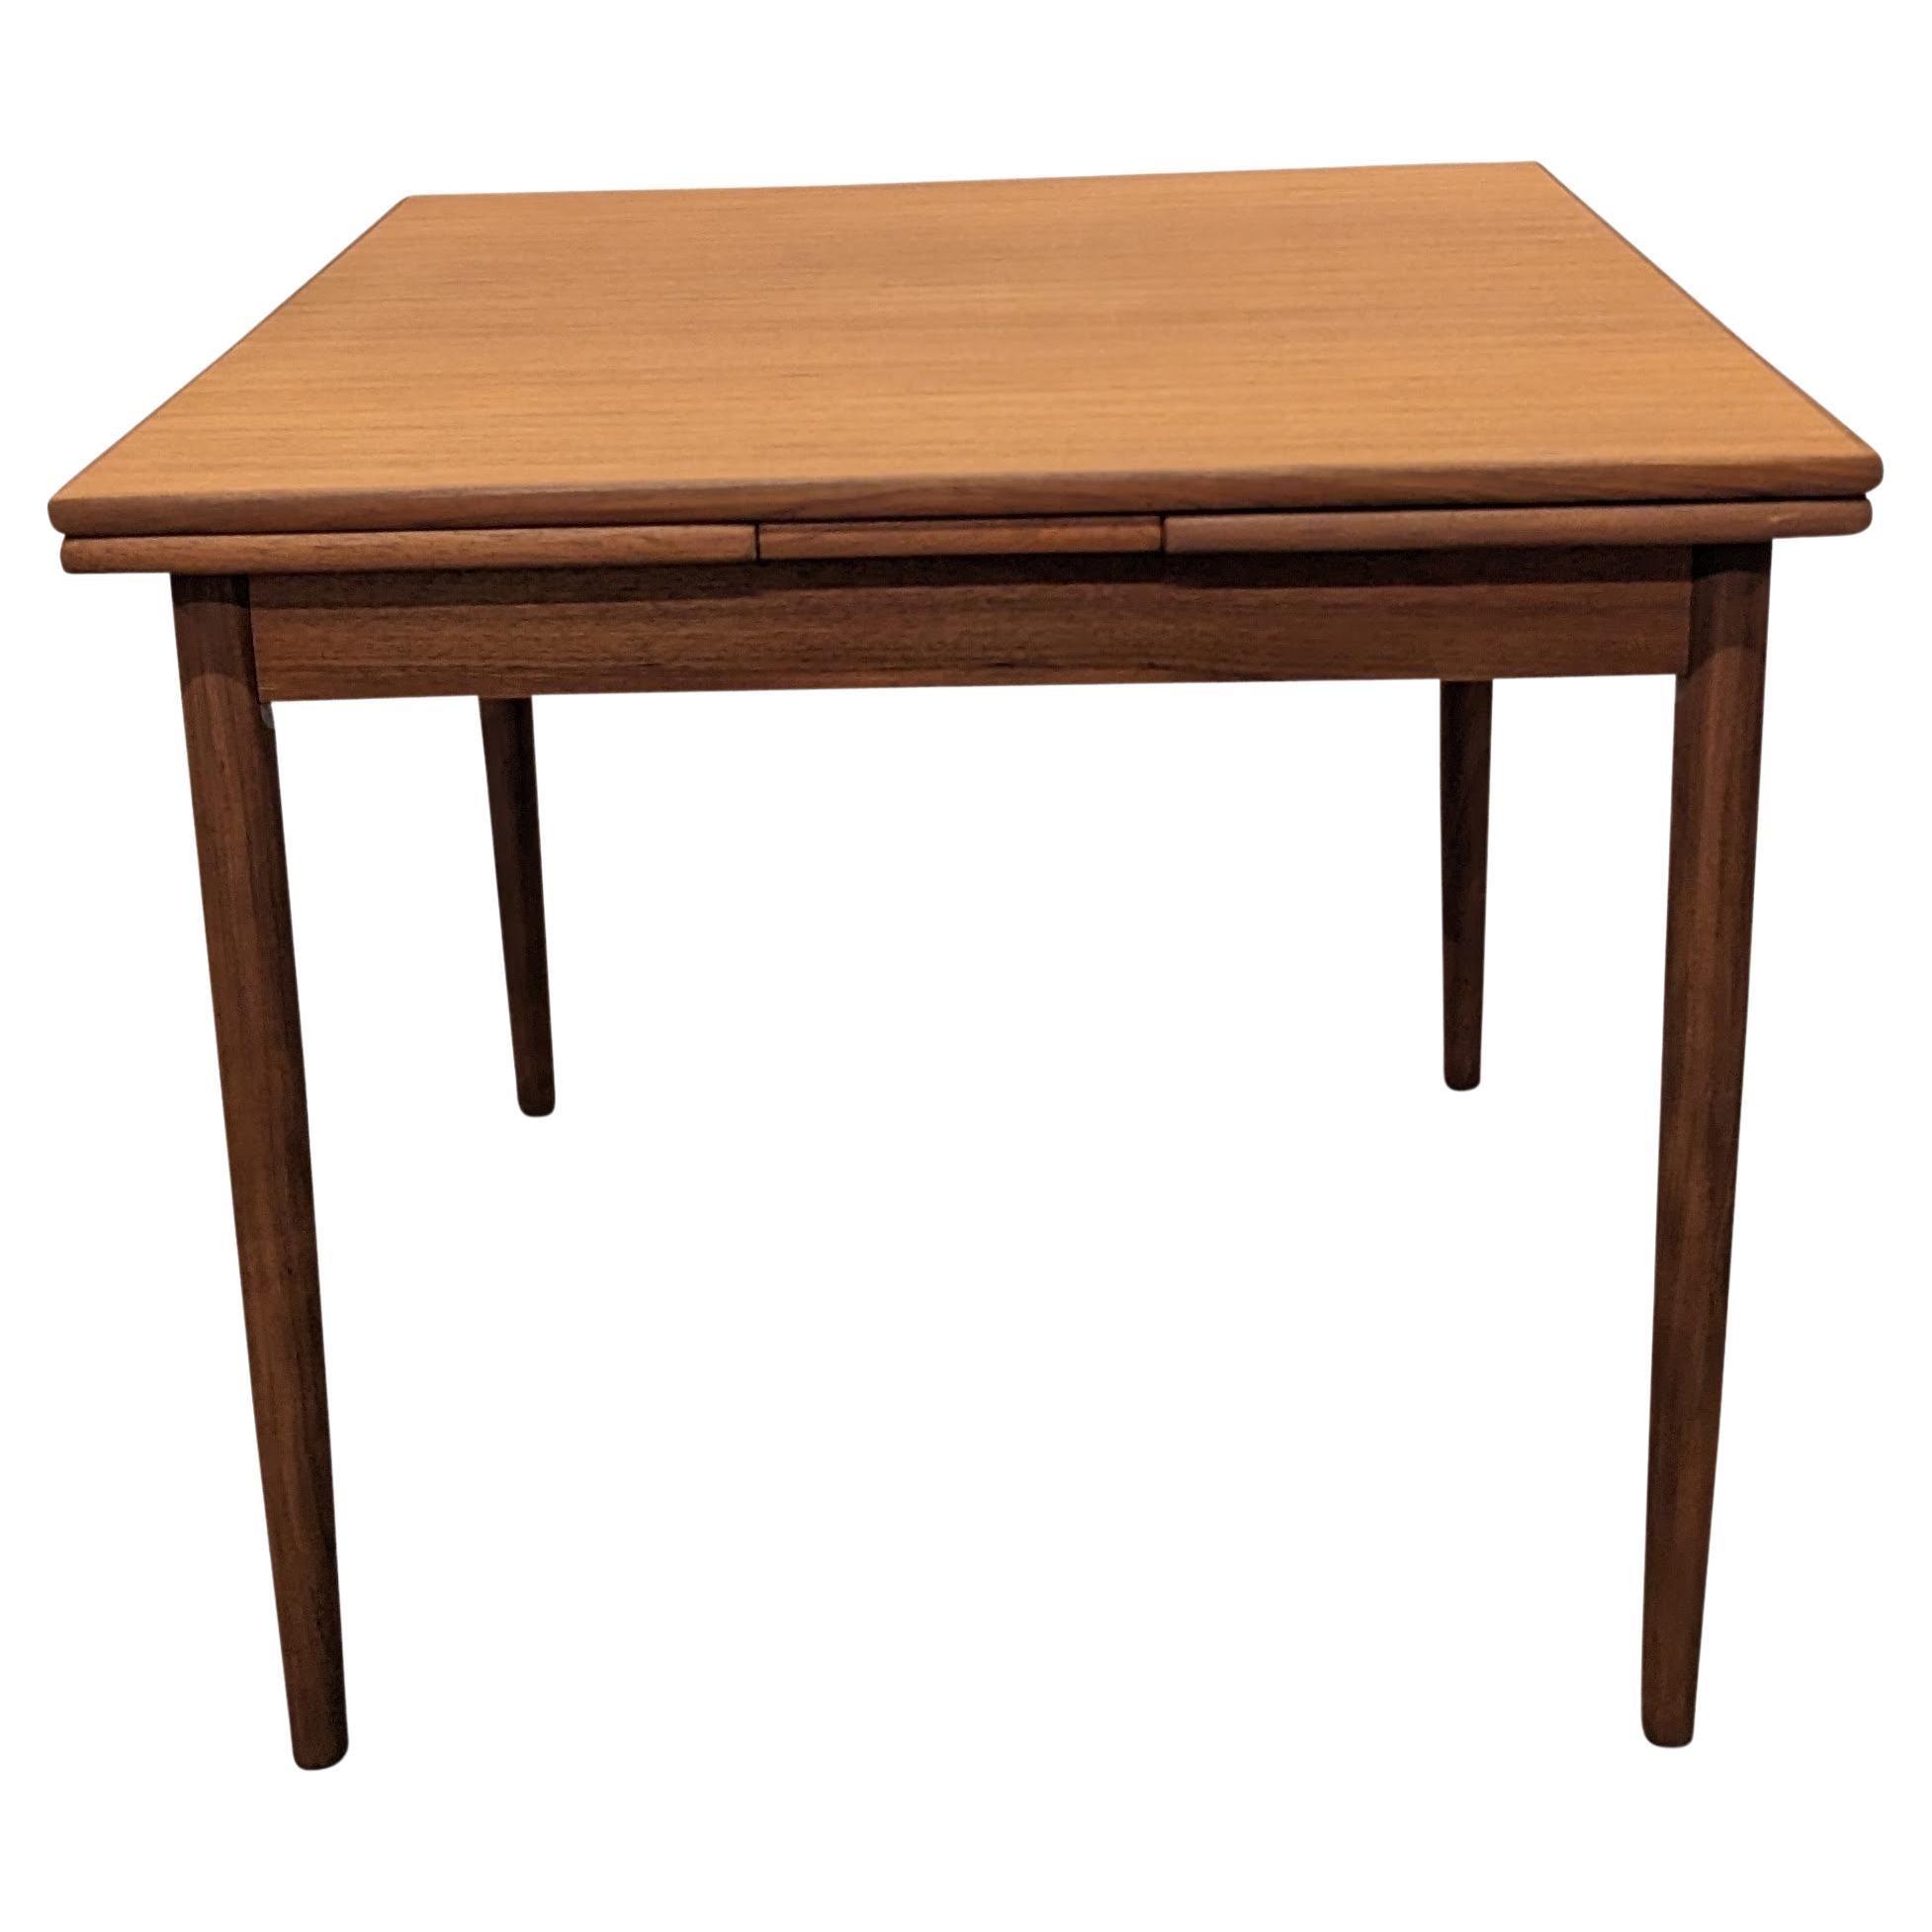 Vintage Danish Mid Century Square Dining Table w 2 Leaves - 082341